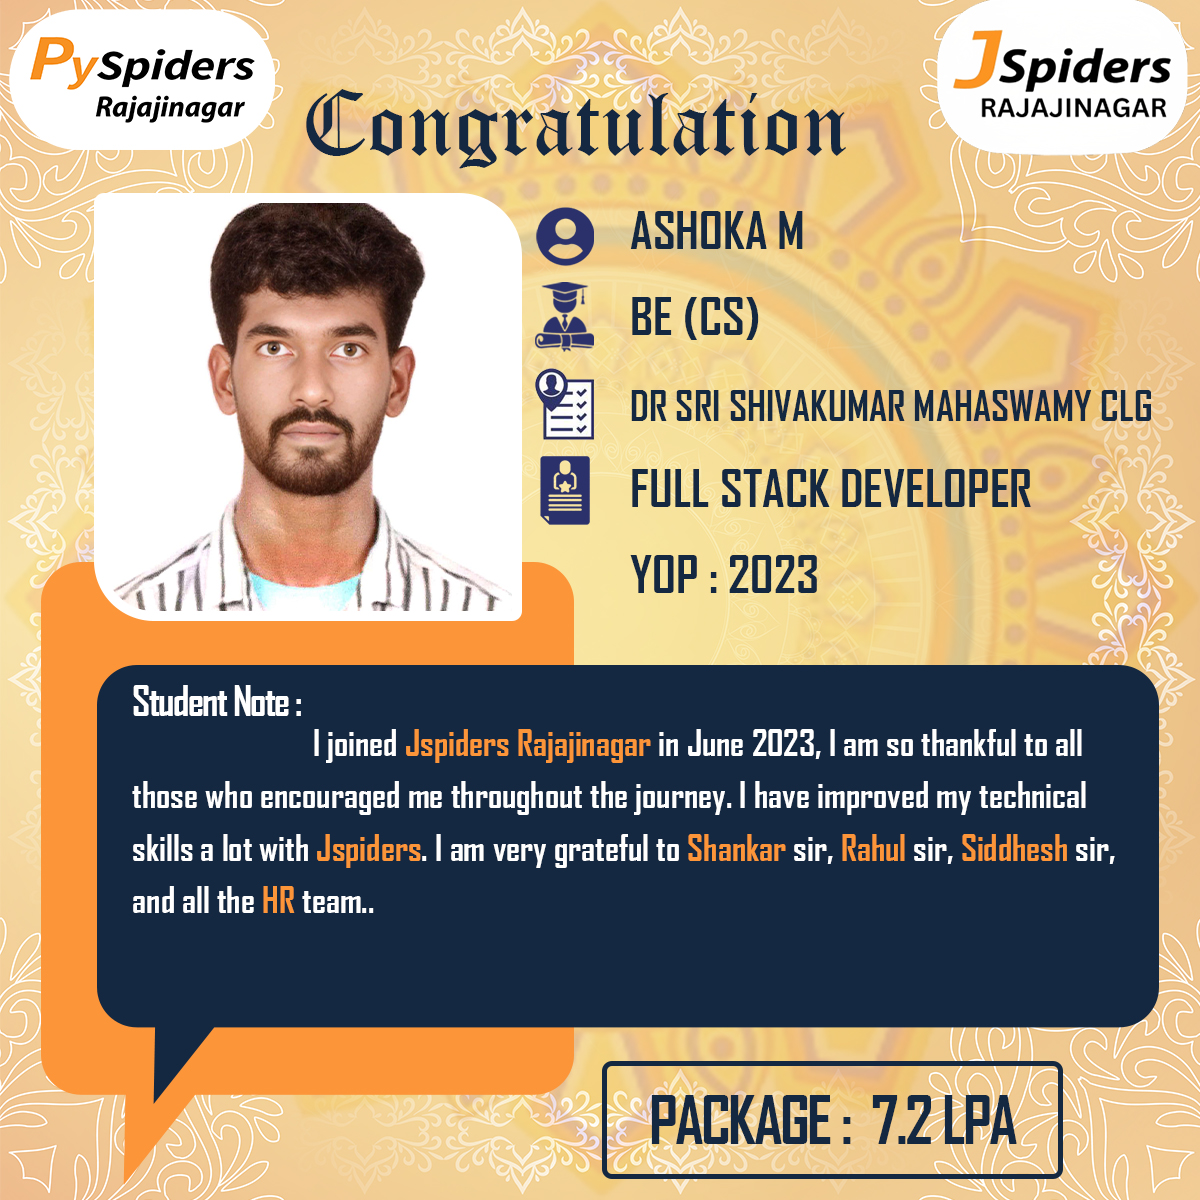 Let's cheer for 'Ashoka M' for securing an amazing job placement. Your dedication and skills have led you to this achievement. Wishing you abundant success and happiness in your new role.

#placements #jobsuccess #newbeginnings #studentcareer #congratulations #jspidersrajajinagar